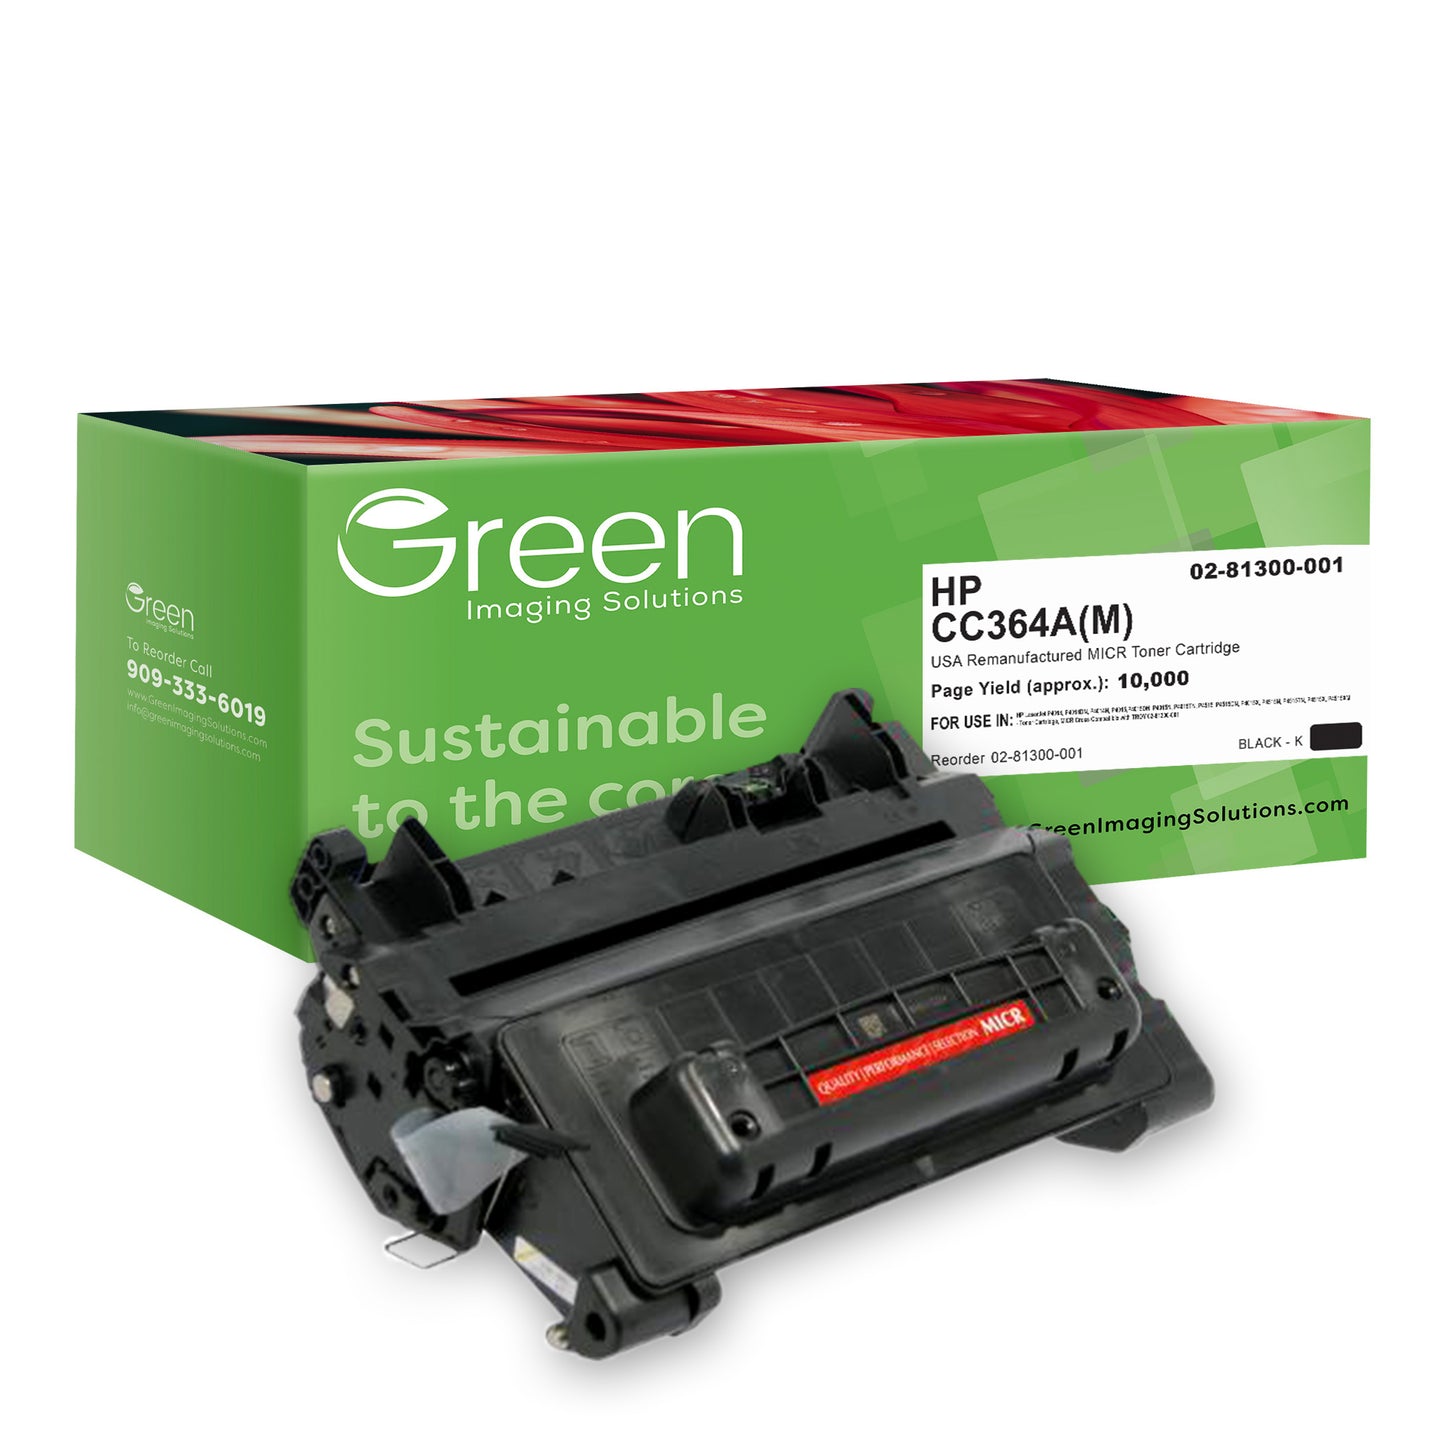 GIS USA Remanufactured MICR Toner Cartridge for HP CC364A, TROY 02-81300-001